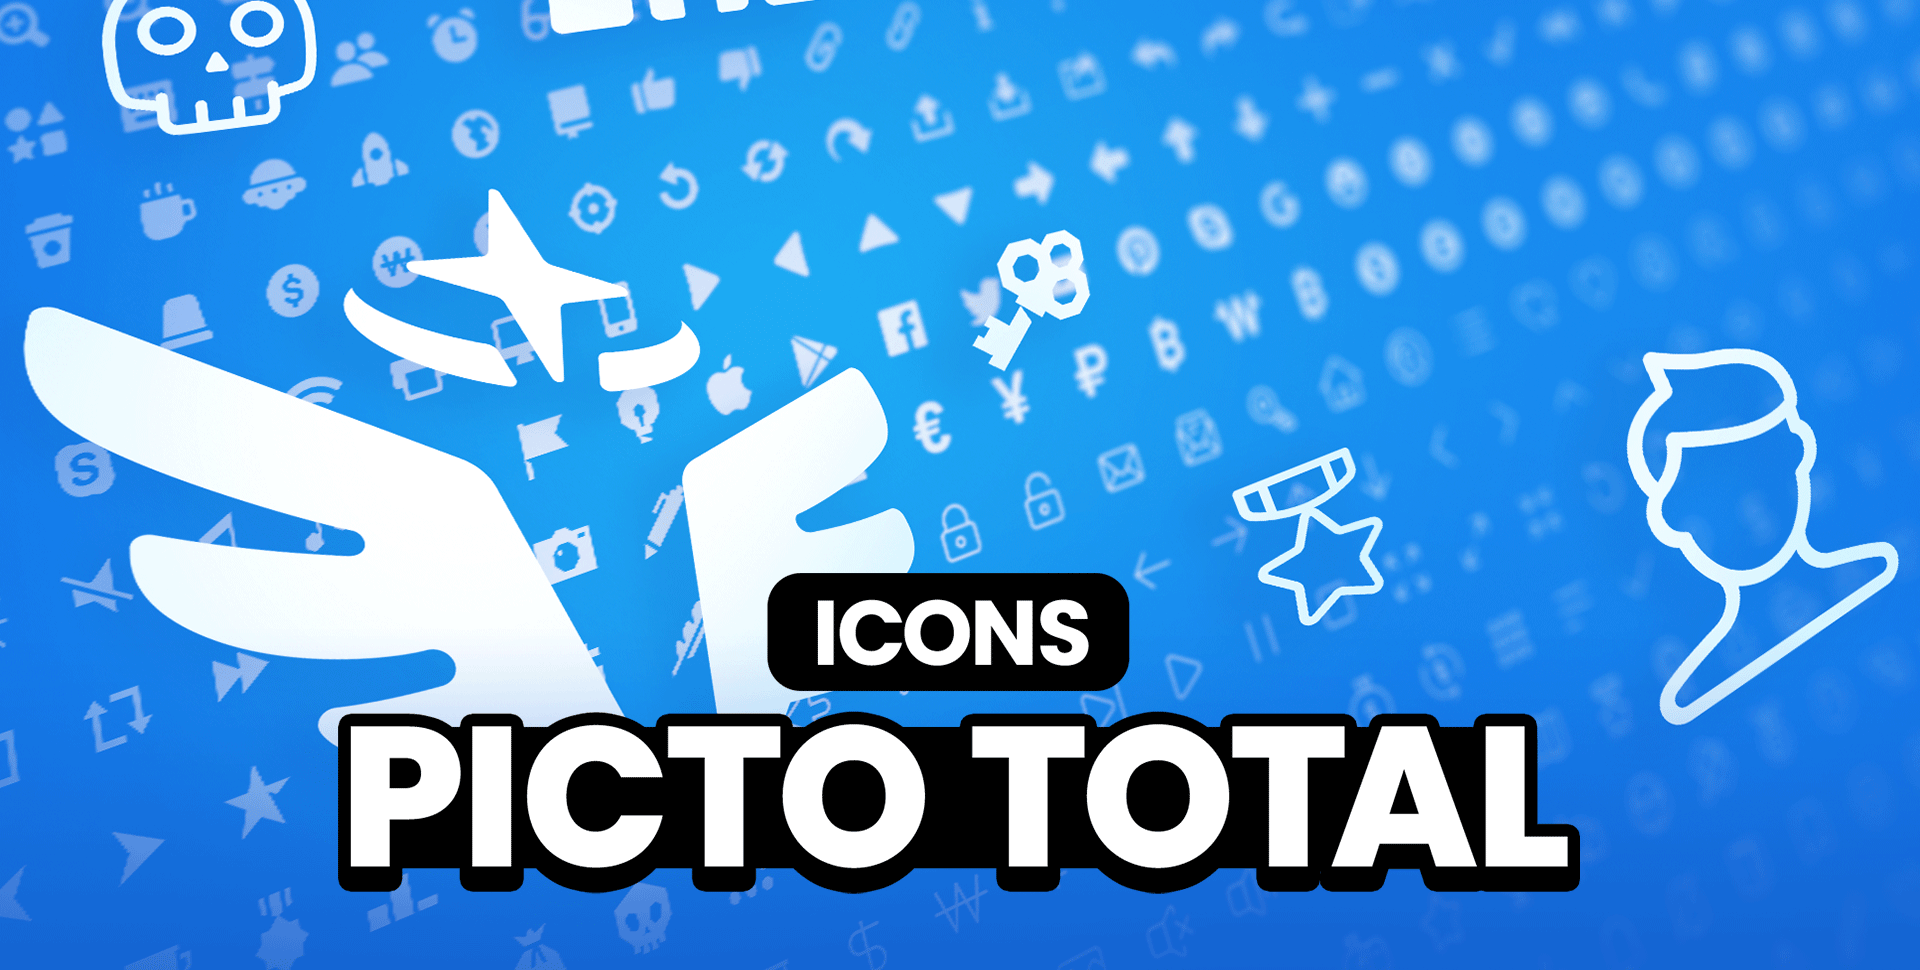 2D Icons - Picto Total Pack